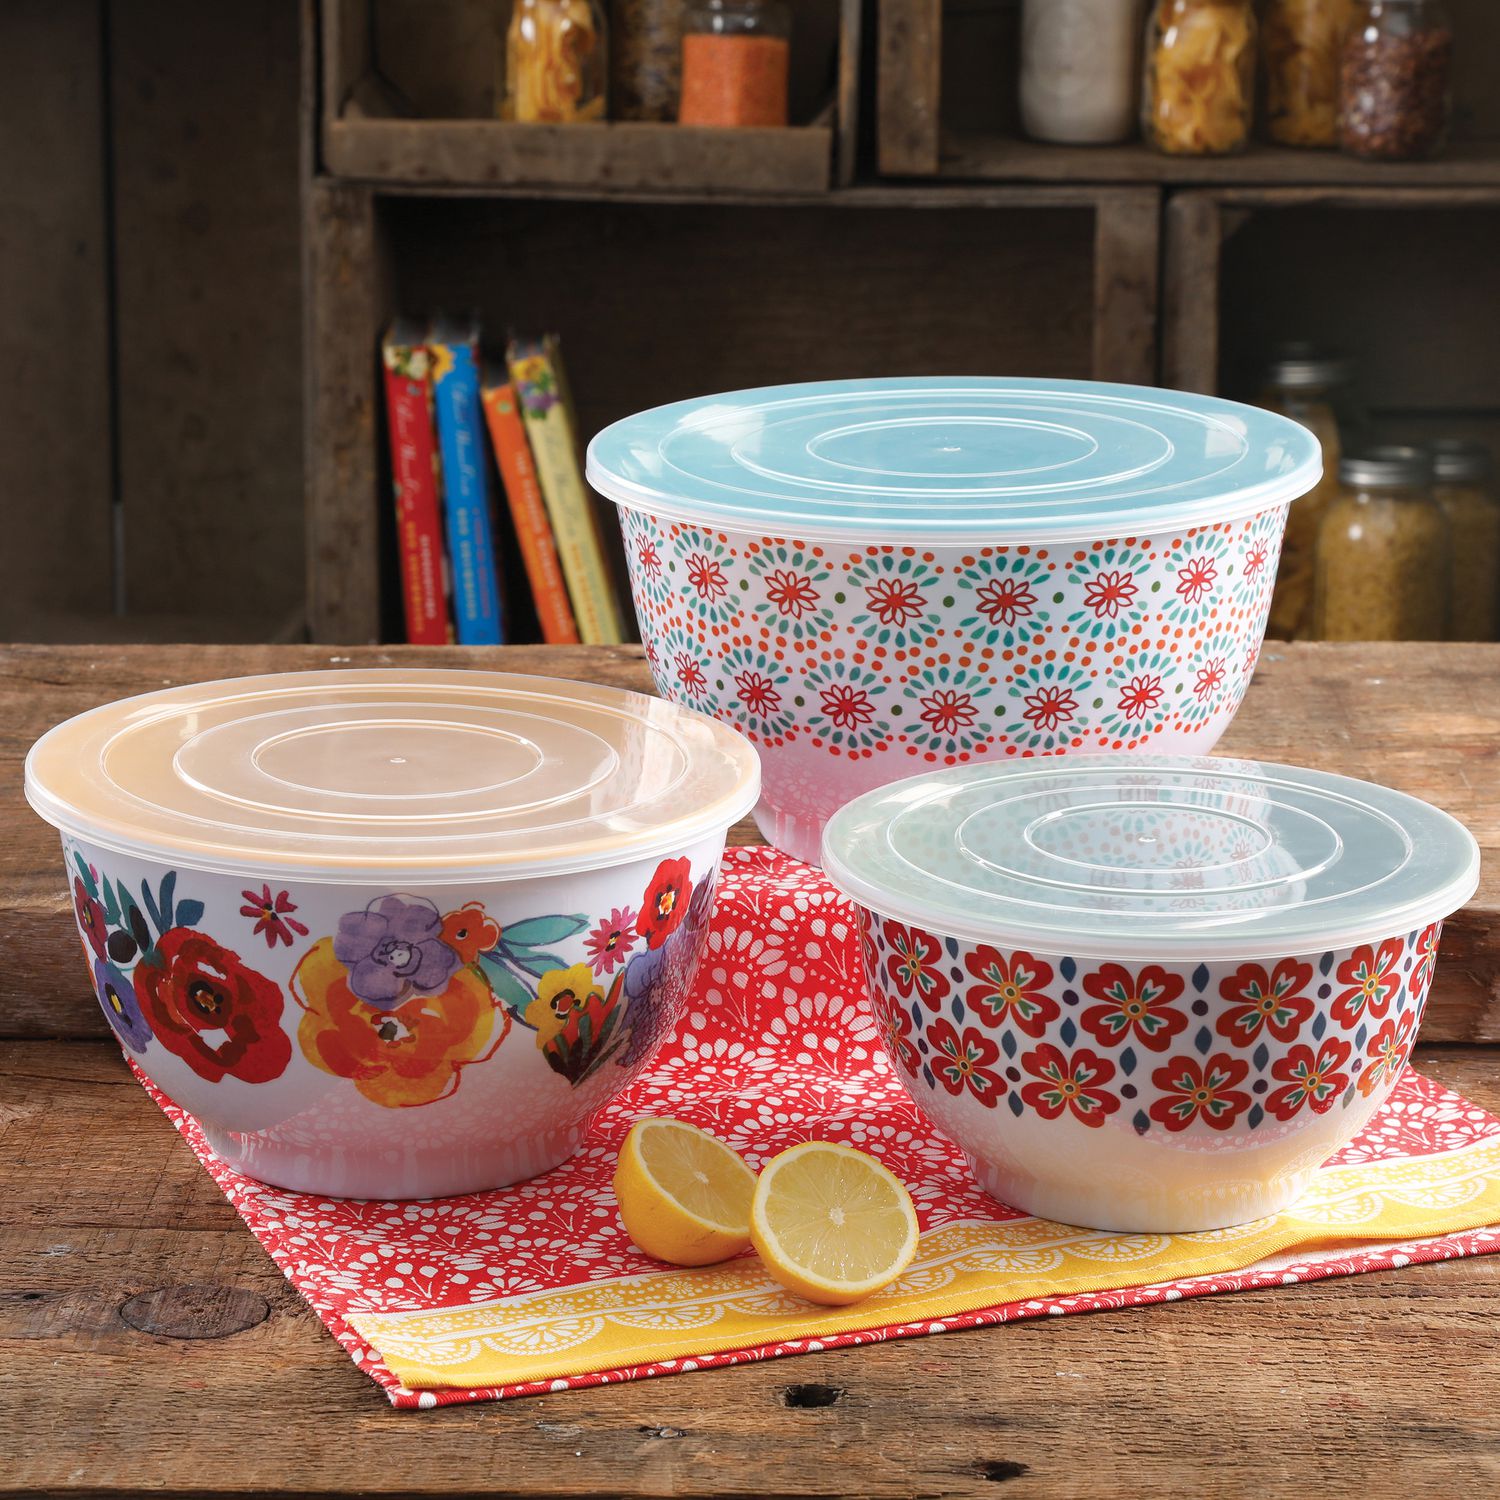 The Pioneer Woman Melamine Mixing Bowl Sets with Lids (Cheerful Rose)